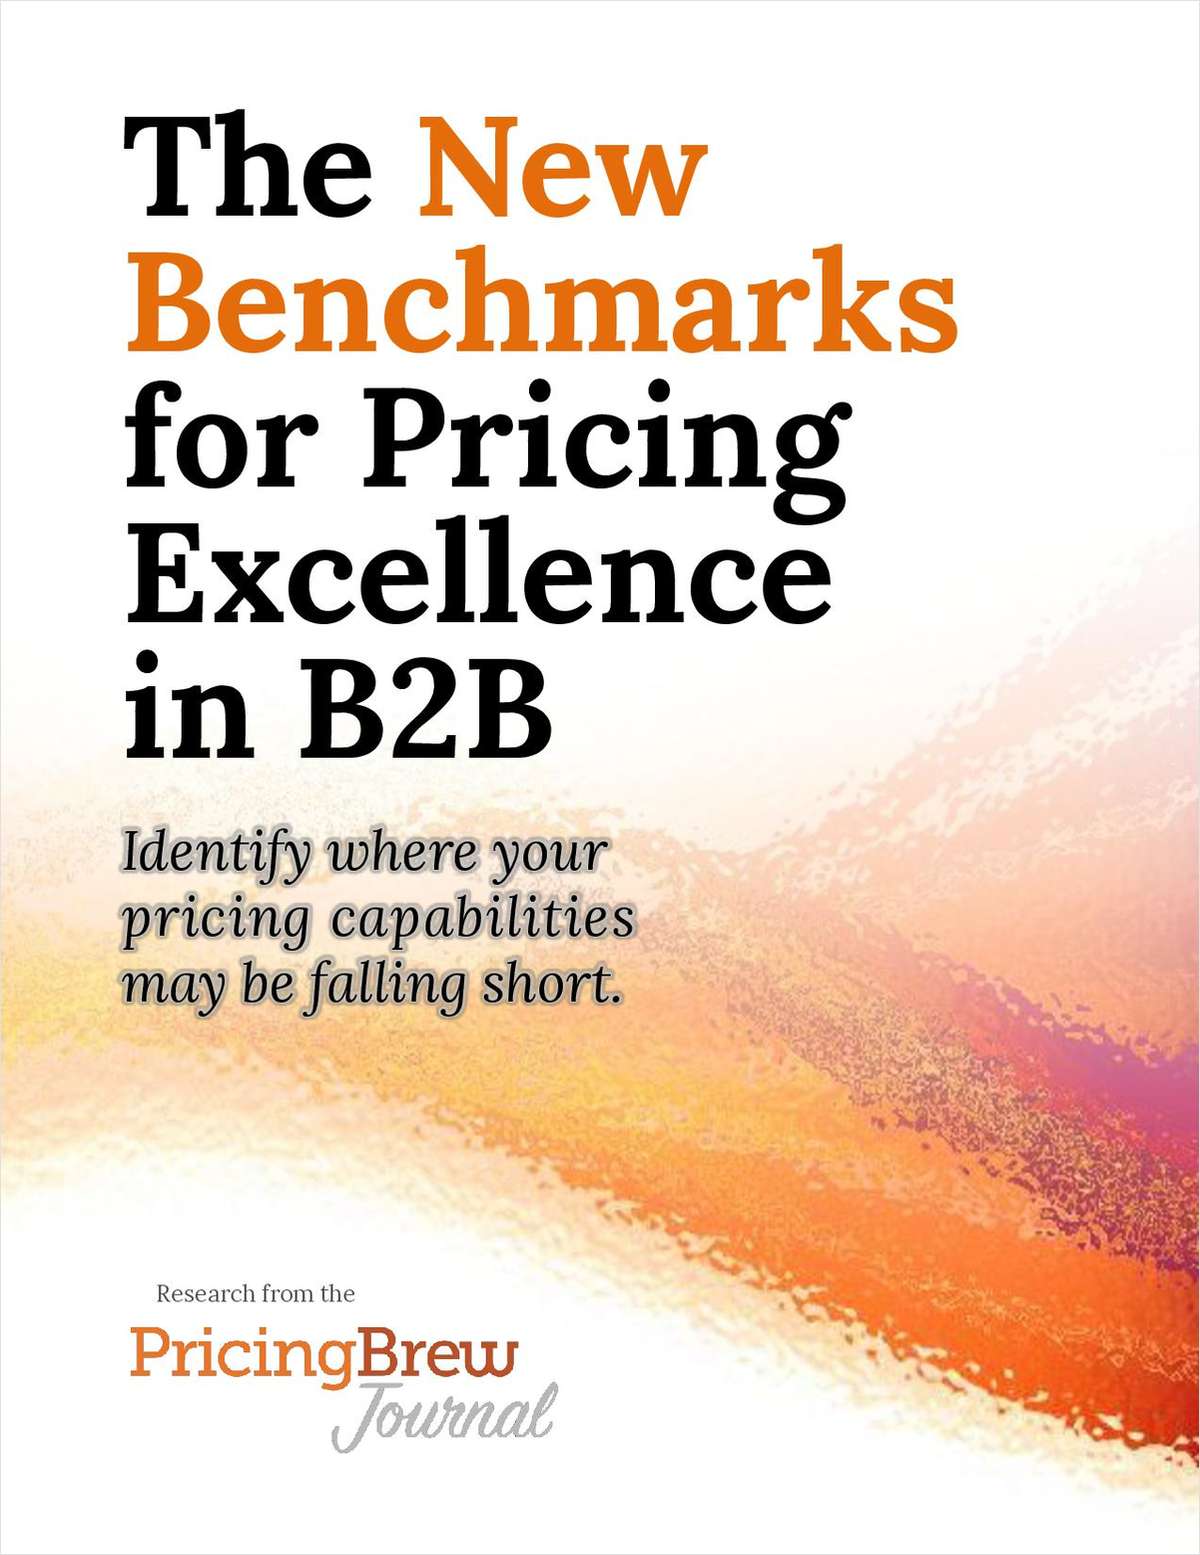 The New Benchmarks for Pricing Excellence in B2B